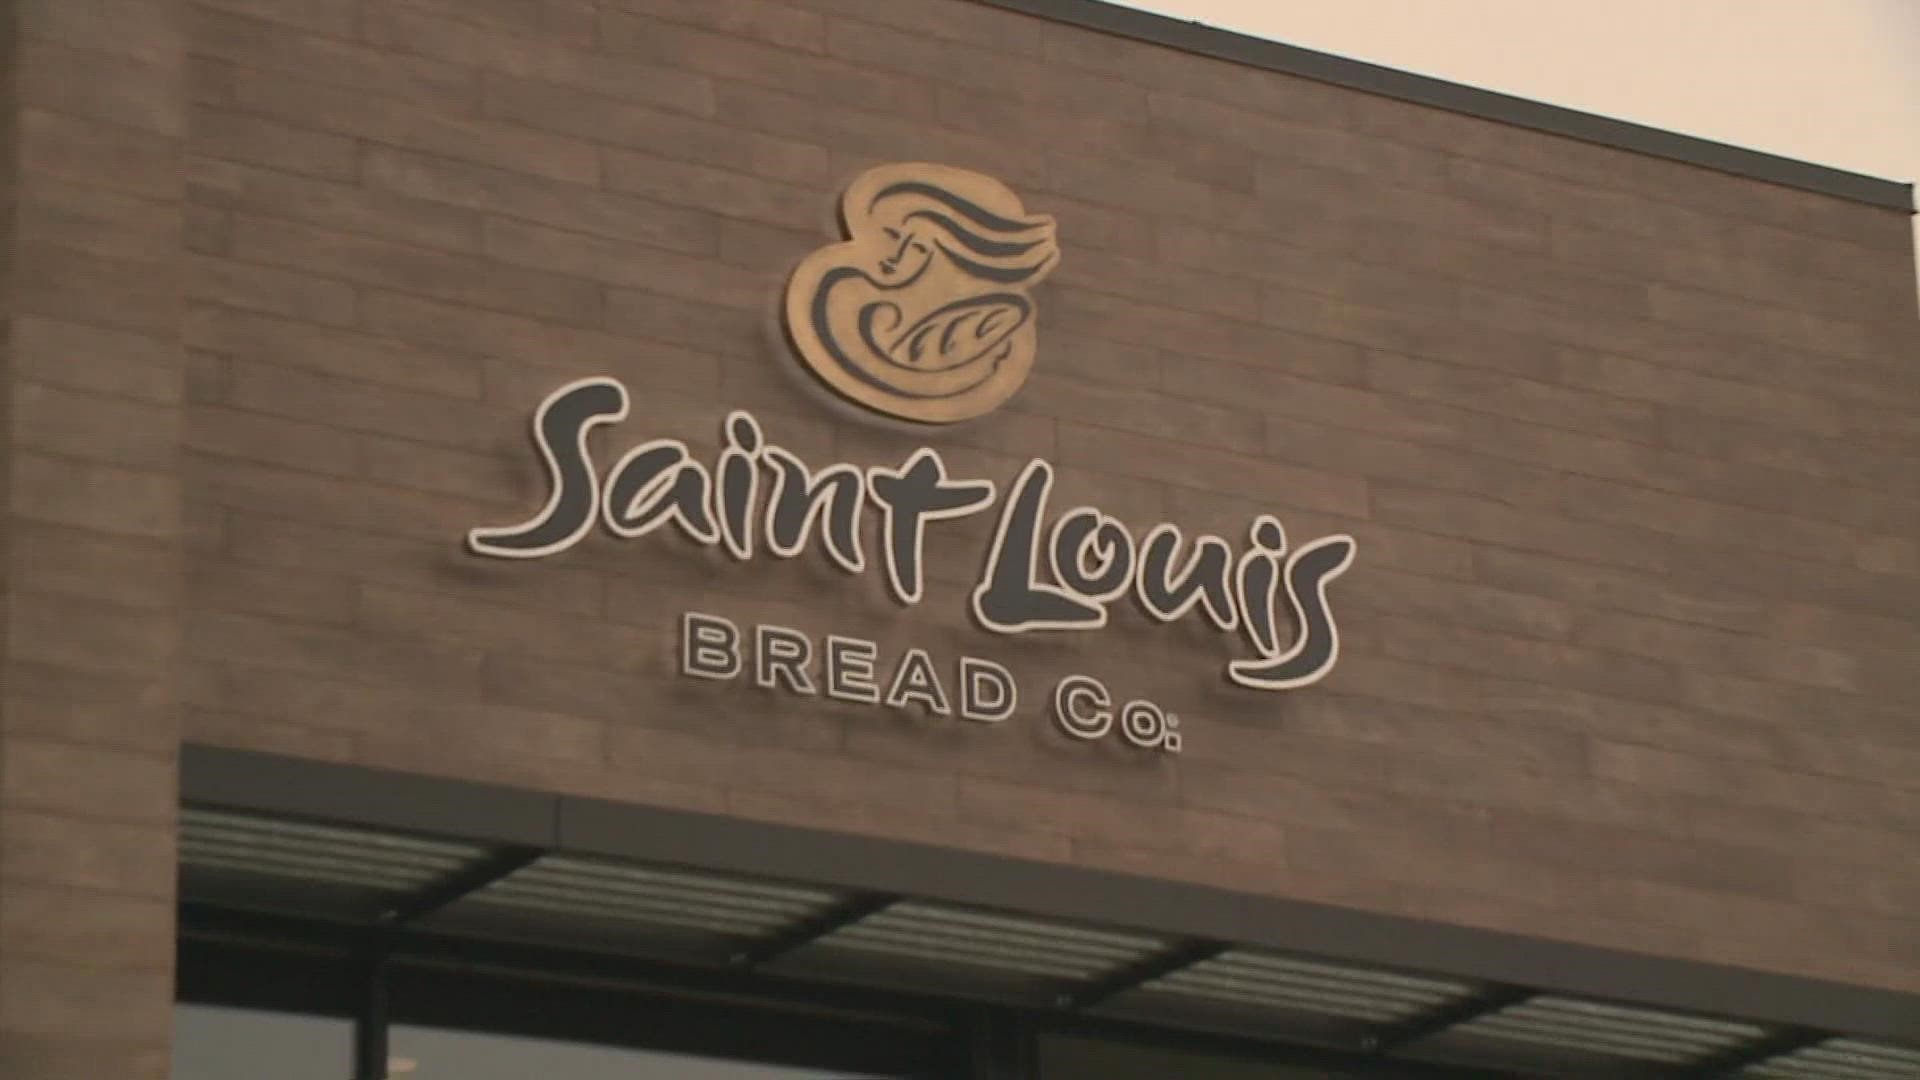 If you live outside of St. Louis limits, you might have to start calling it Panera Bread.